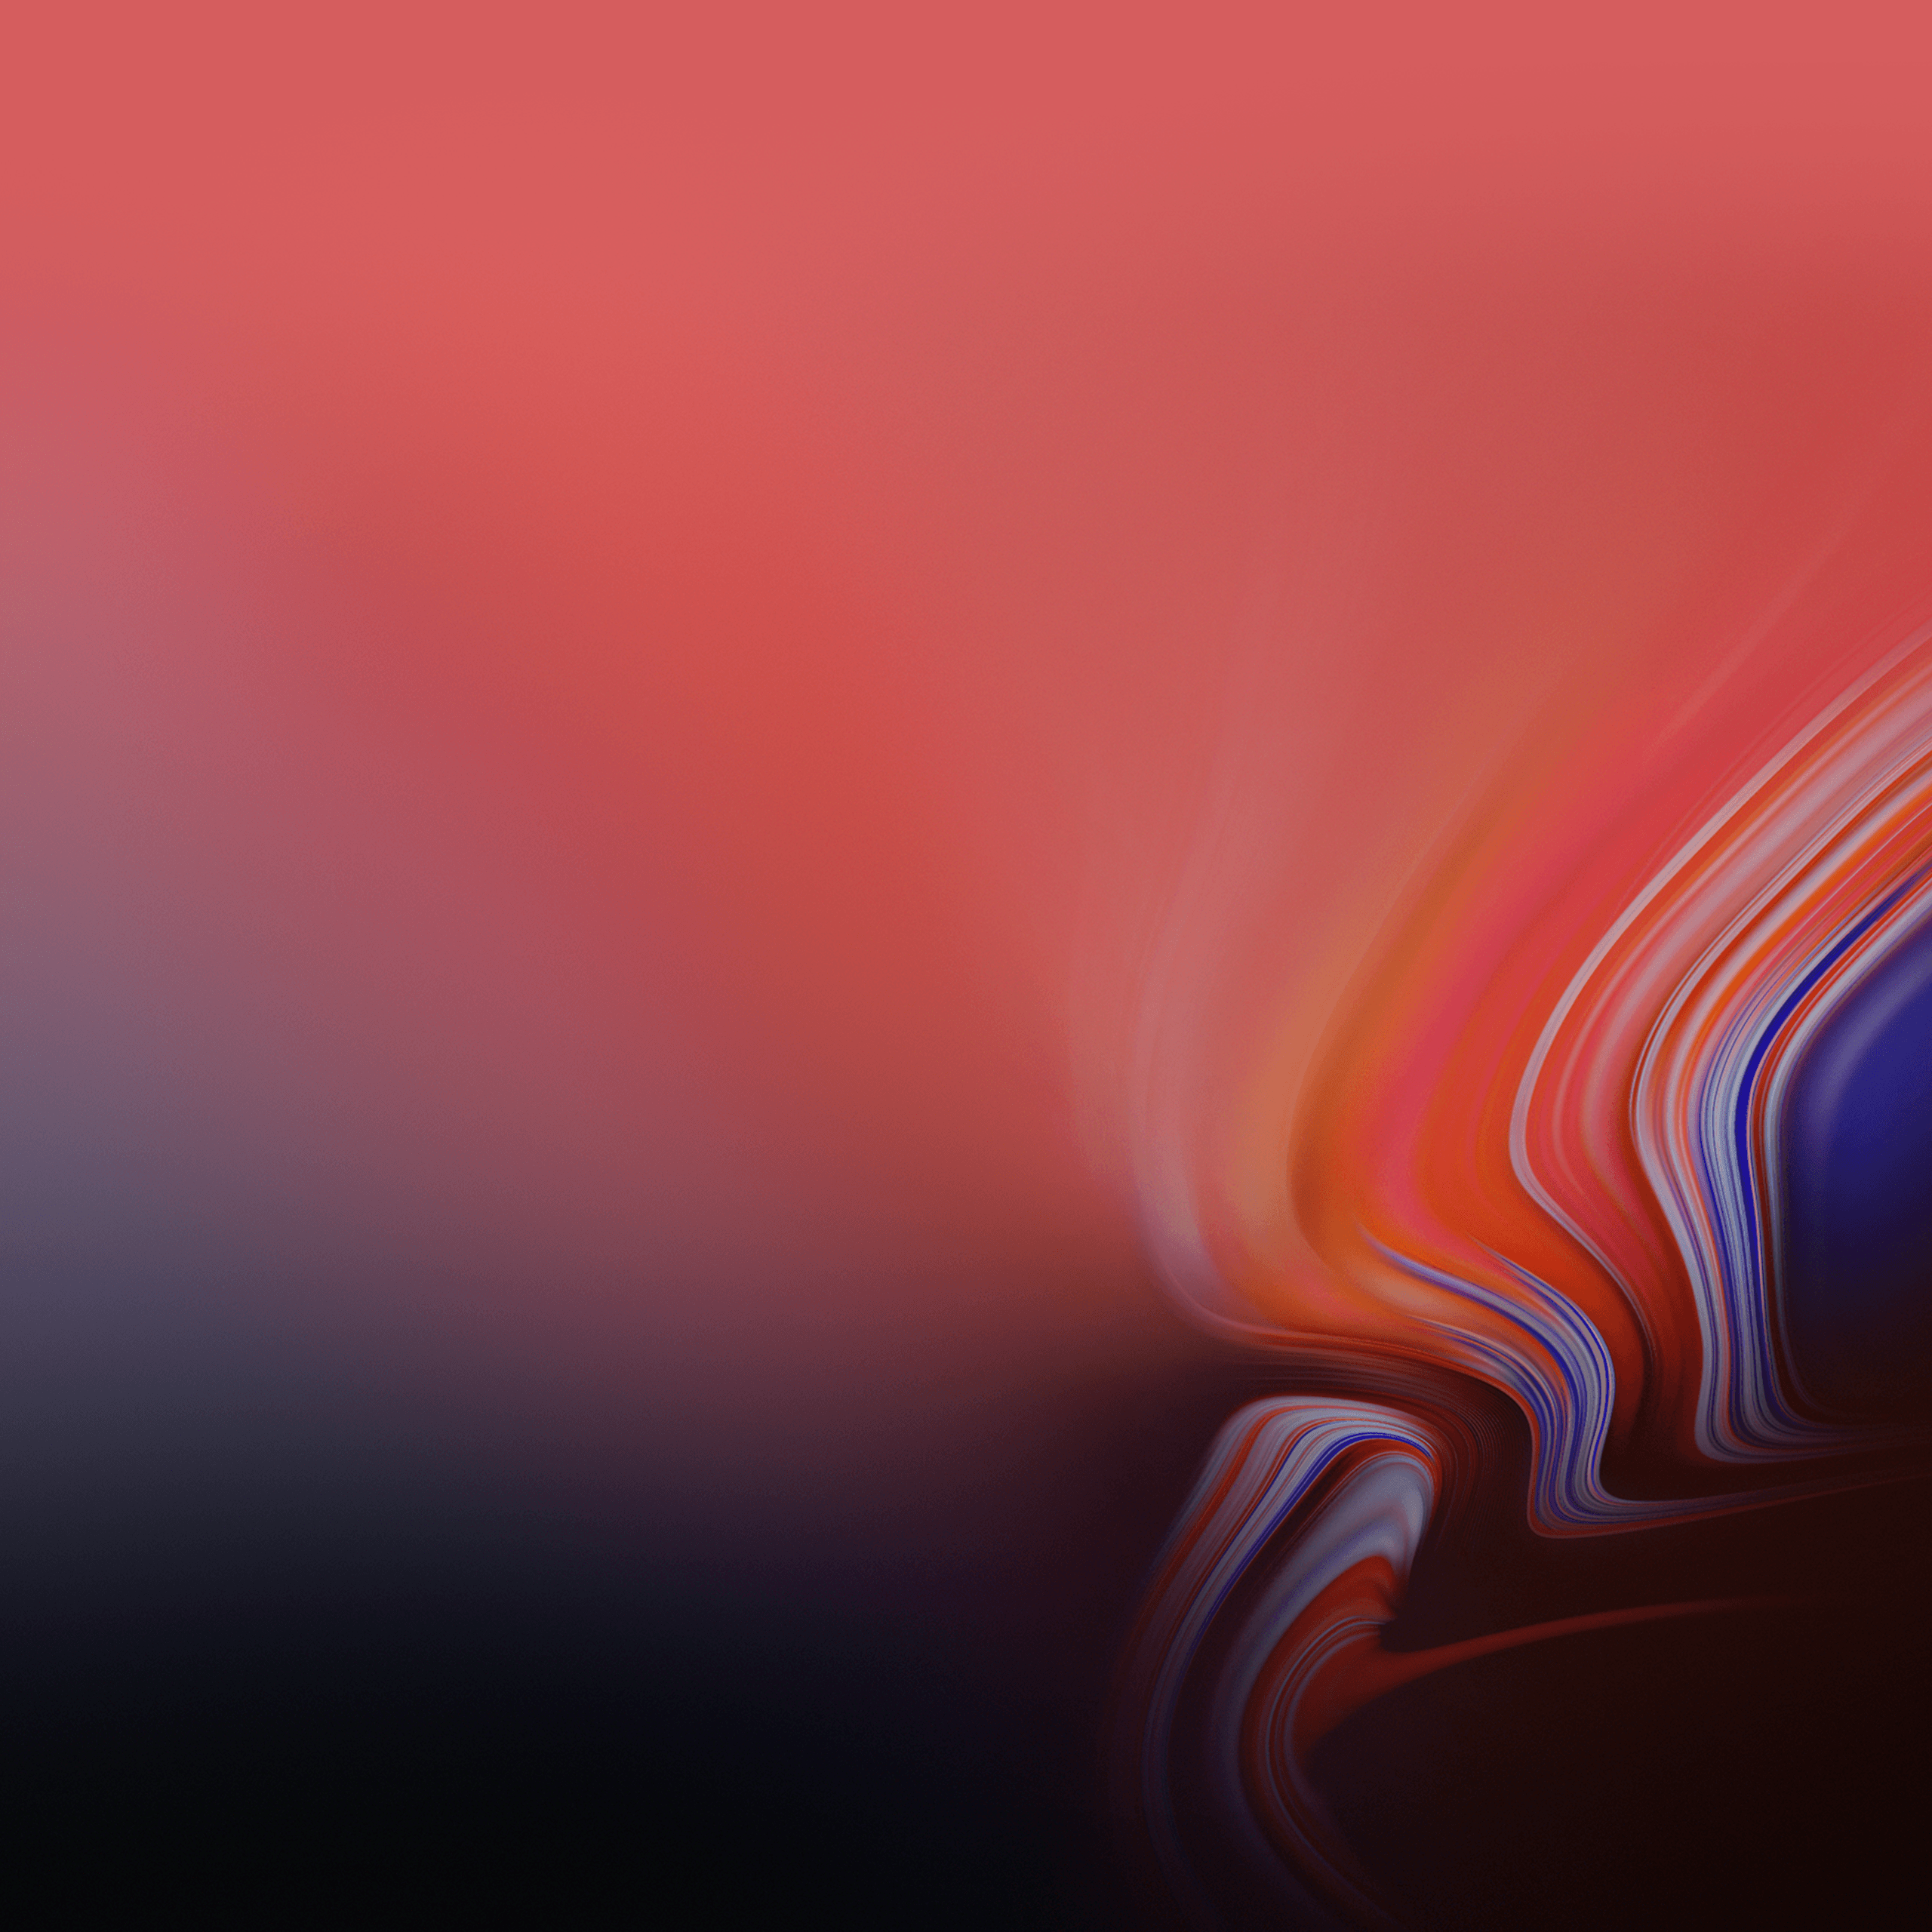 Here are all of the official wallpapers from the Galaxy Note9 and Tab S4